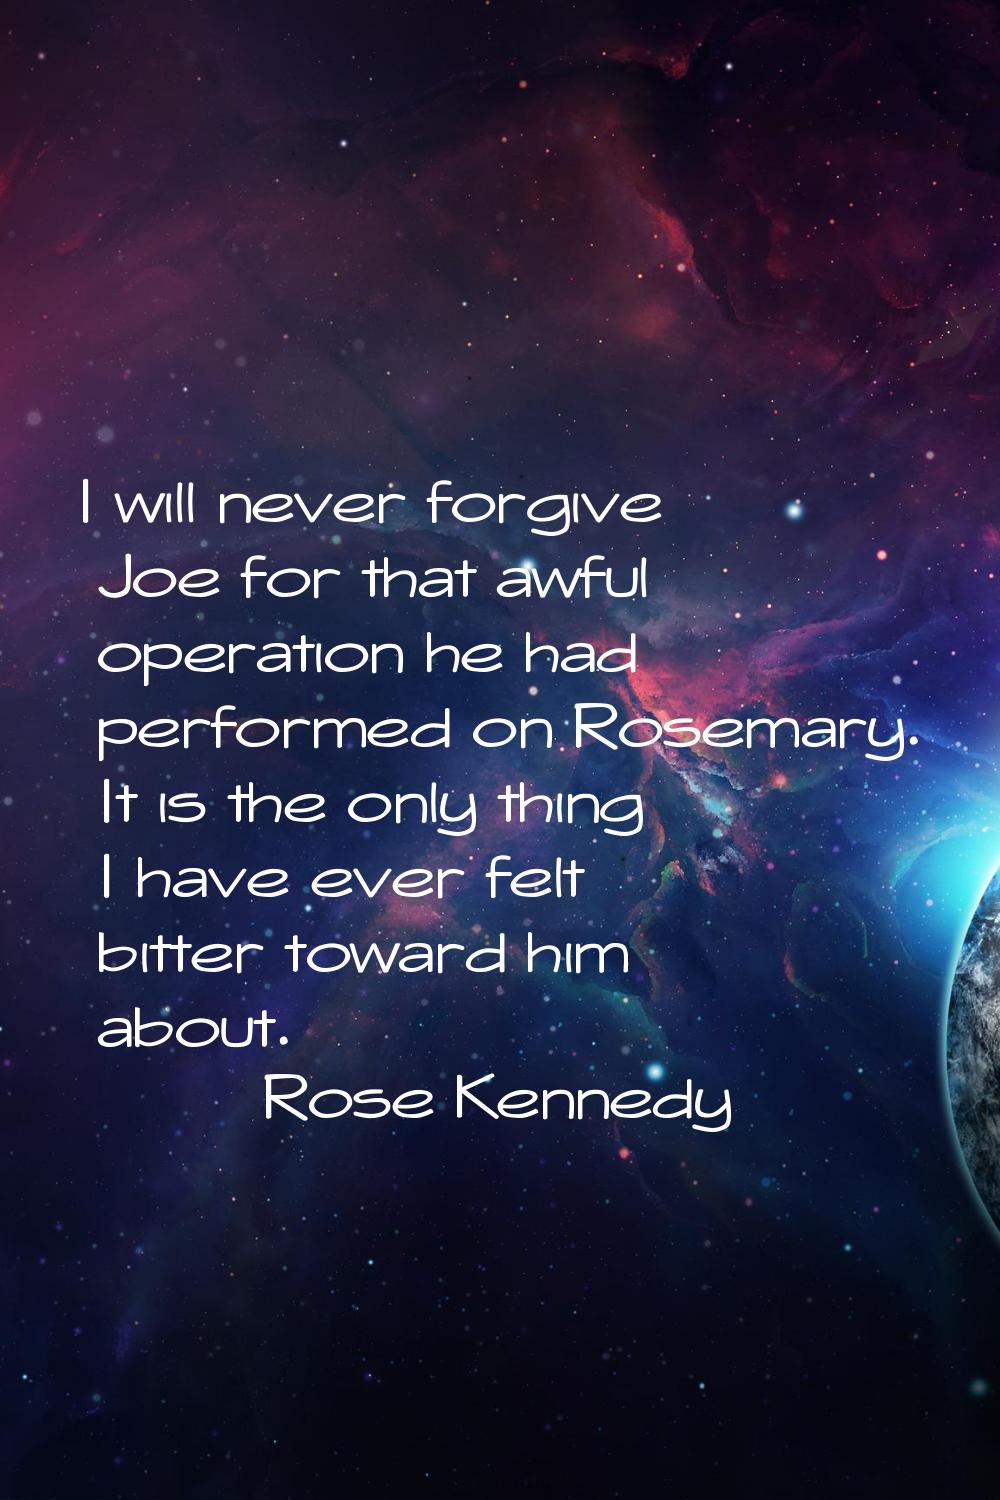 I will never forgive Joe for that awful operation he had performed on Rosemary. It is the only thin